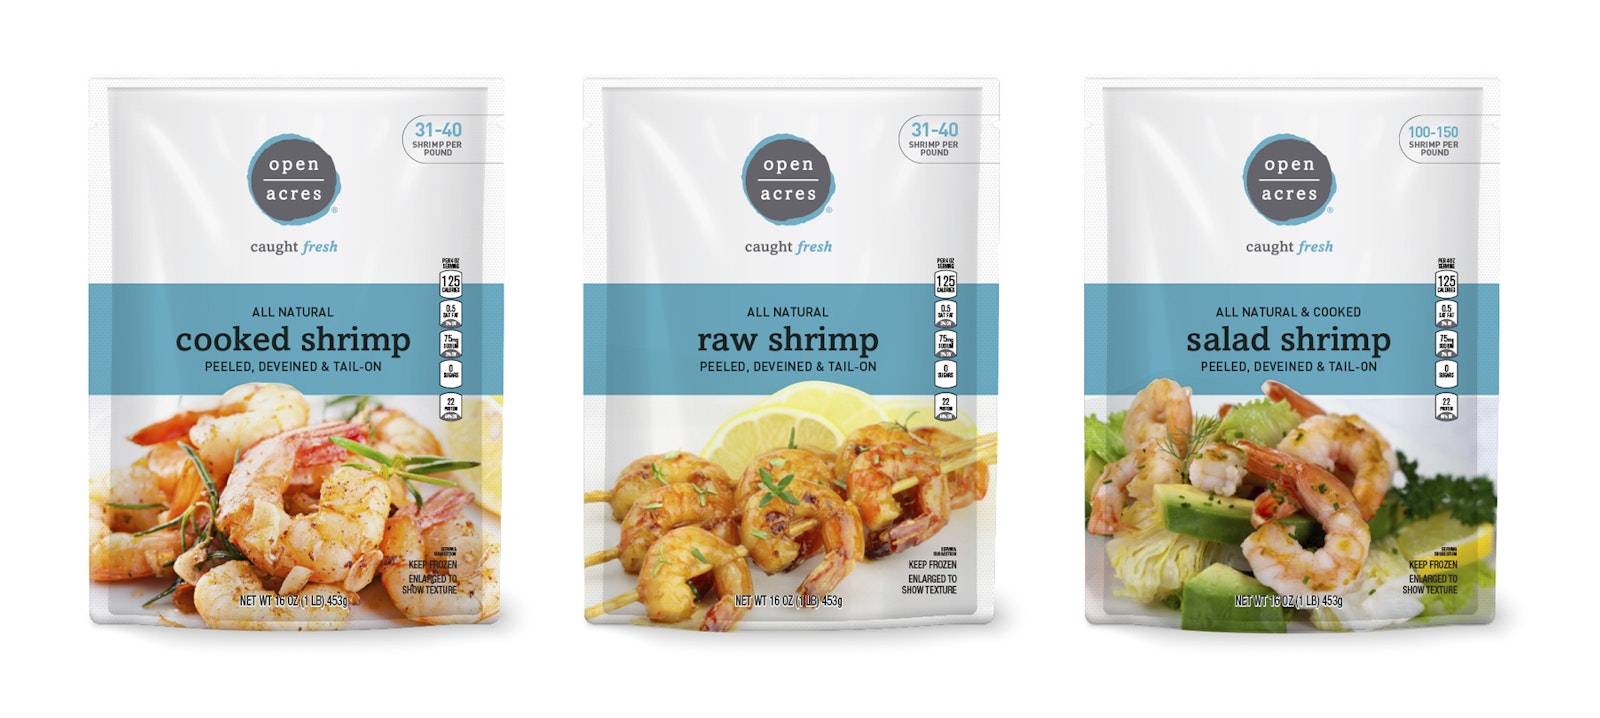 The Open Acres brand packaging design with shrimp product in three package types on white.